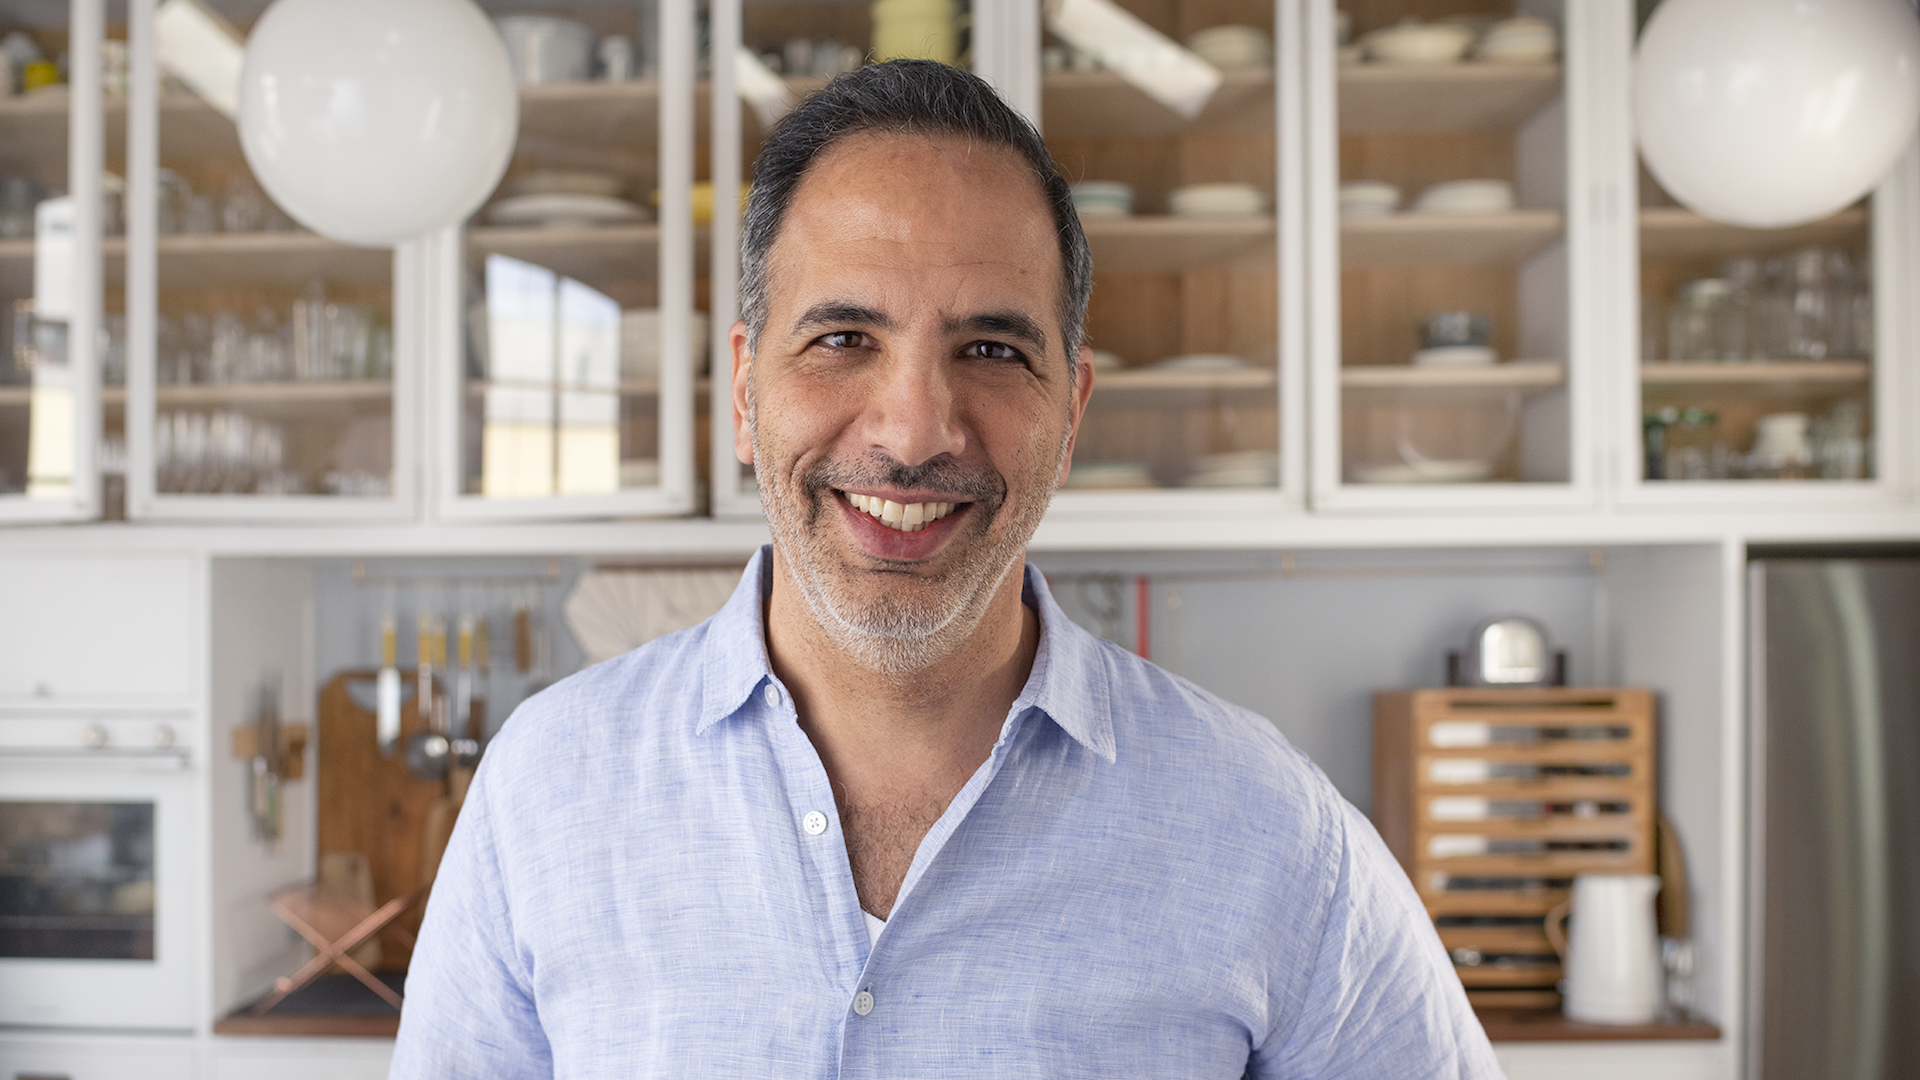 Renowned Israeli Chef Yotam Ottolenghi Is Bringing His Rescheduled Speaking Tour to Australia in January